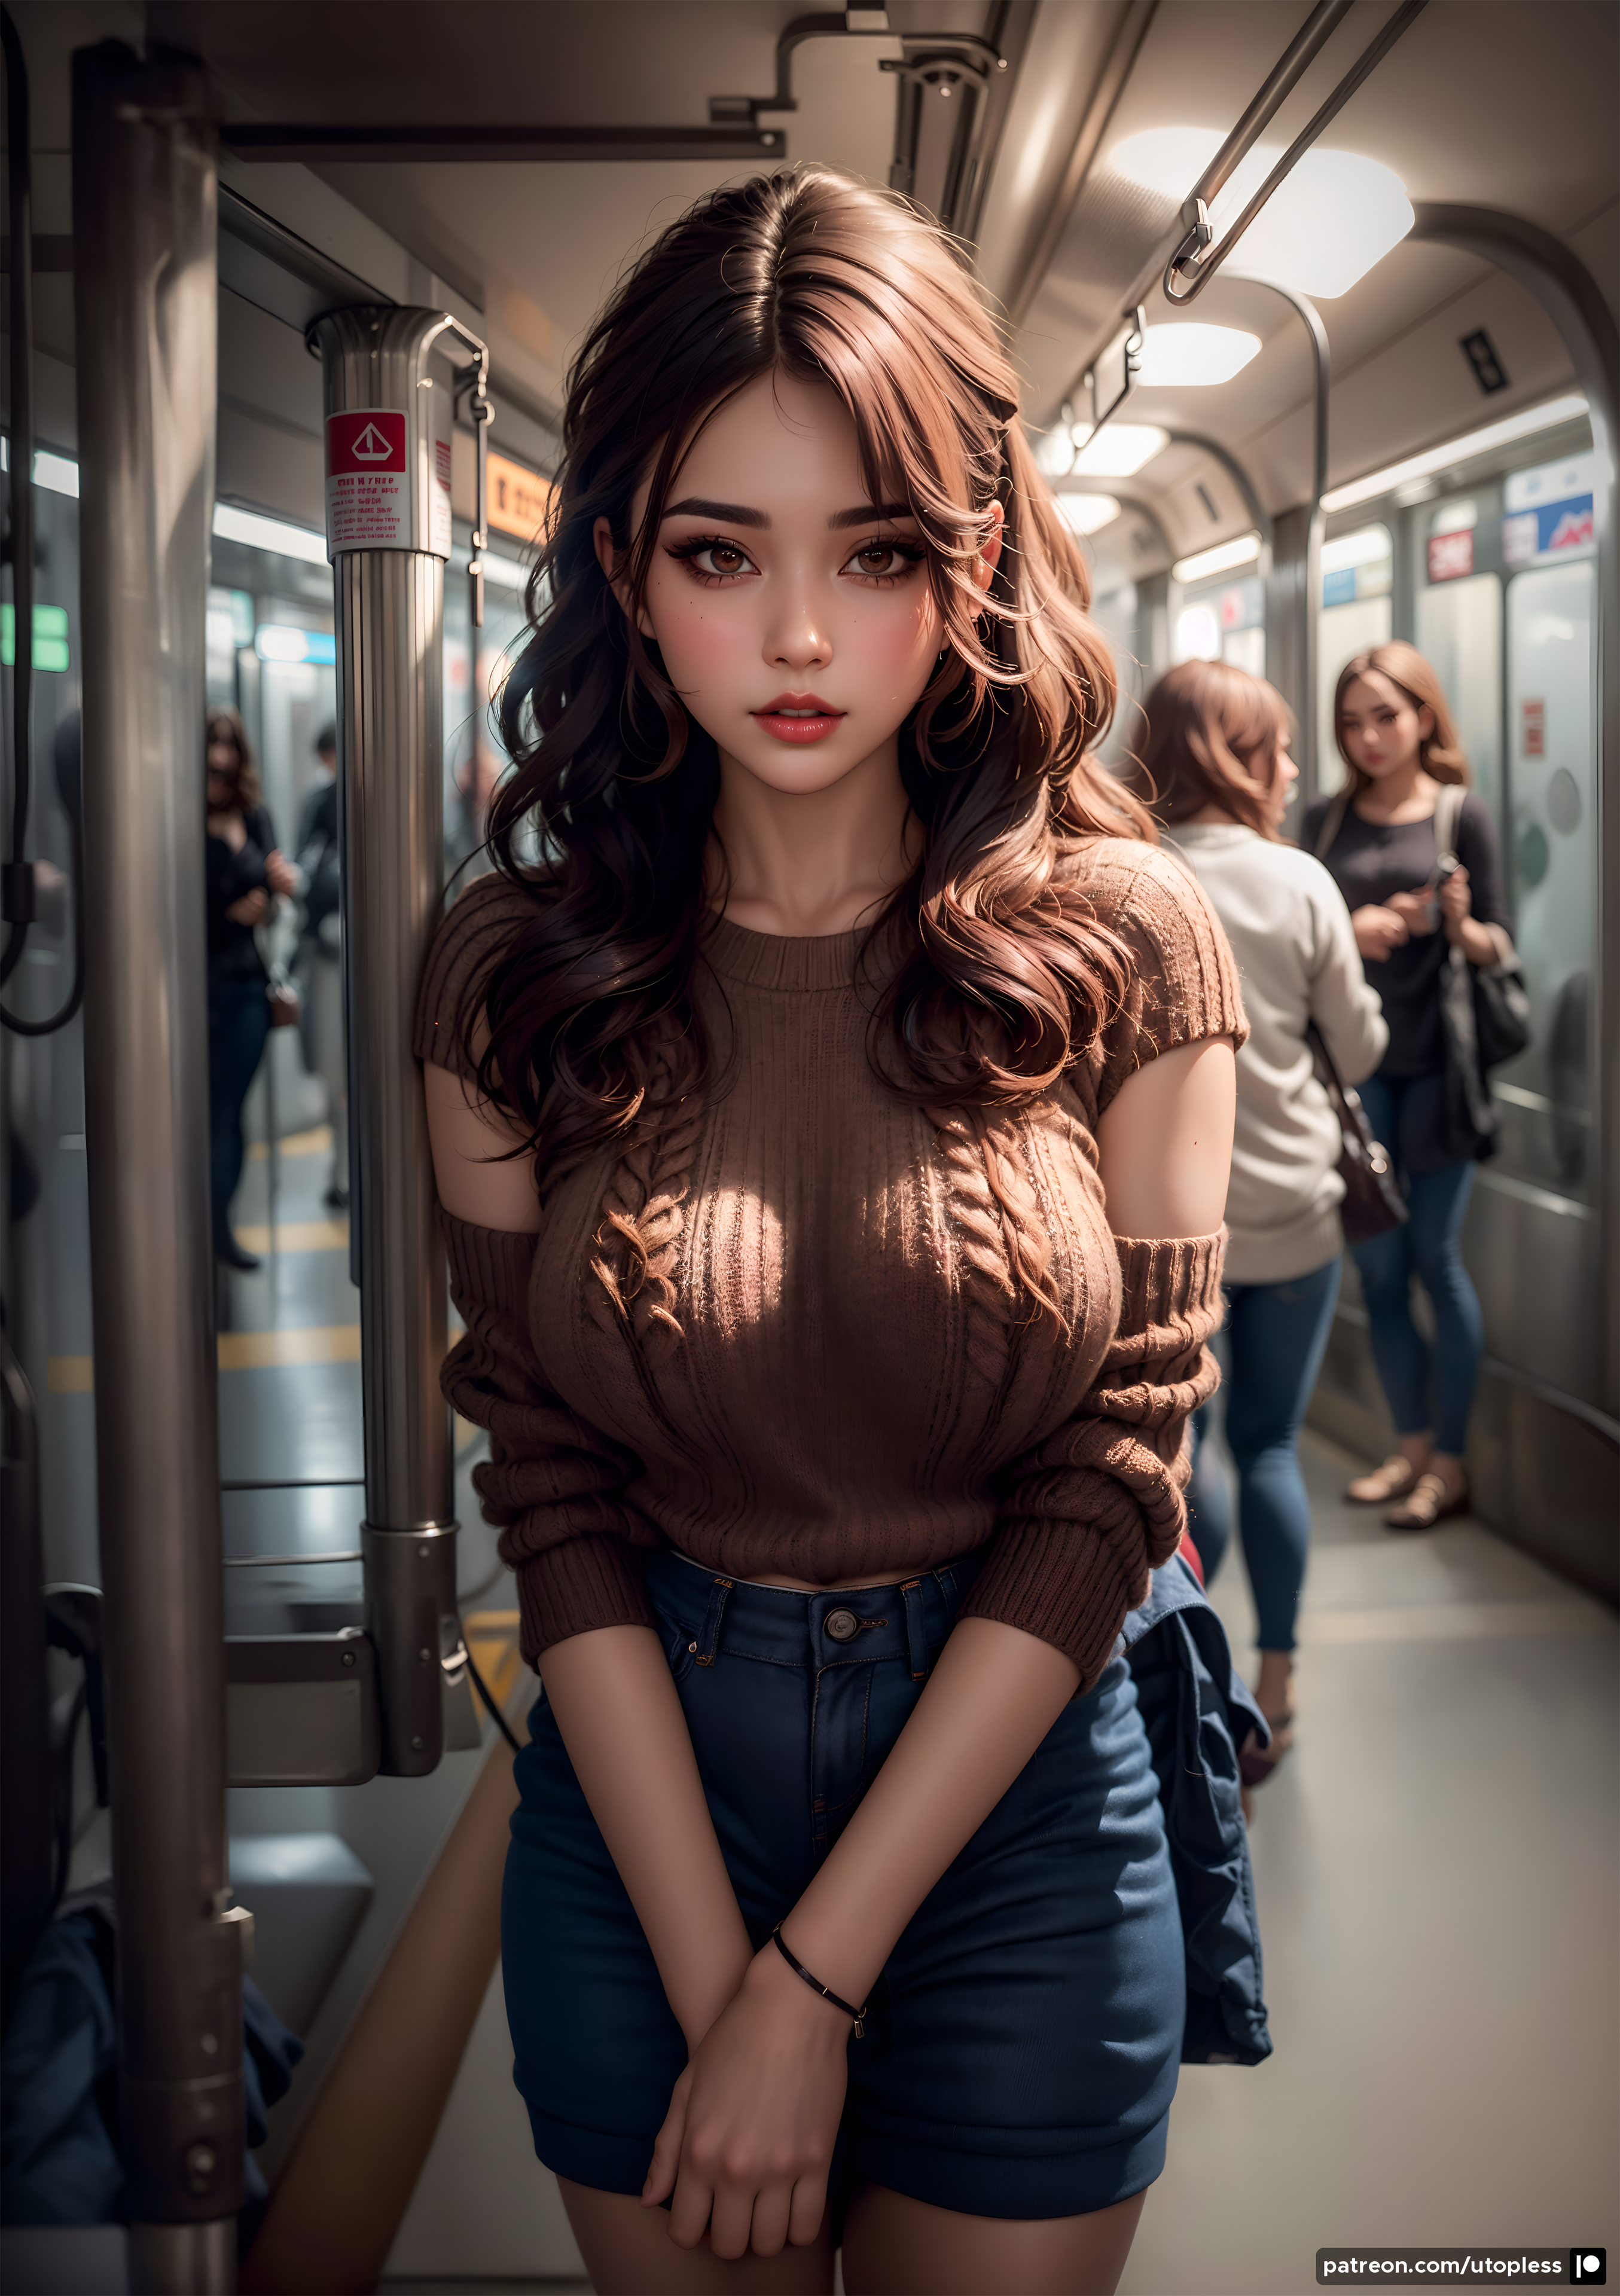 General 2709x3840 Utopless women AI art Stable Diffusion brunette sweater subway digital art portrait display train looking at viewer standing ceiling lights watermarked juicy lips long hair collarbone shorts brown eyes depth of field brown sweater lights